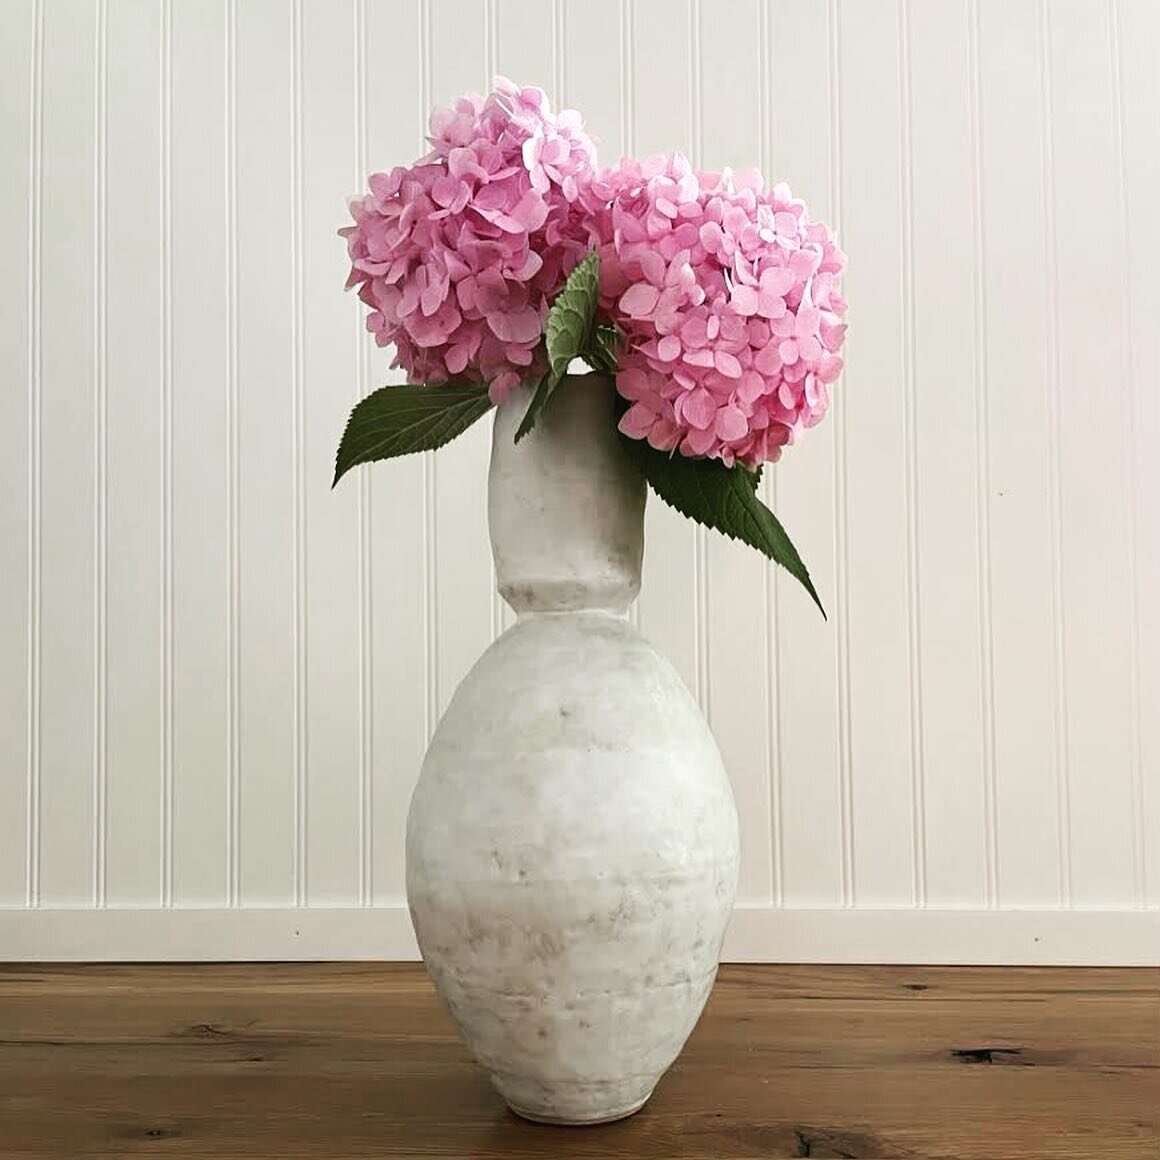 🎉 5 spots left 🎉⁣
Handbuilt Flower Vases ⁣⁣
One Day Workshop⁣⁣
⁣⁣
Come explore handbuilt flower vases with Tom Doyle and Jeremiah Ibarra! Learn a variety of handbuilding techniques in this four hour long workshop. Tom and Jeremiah will teach you ho